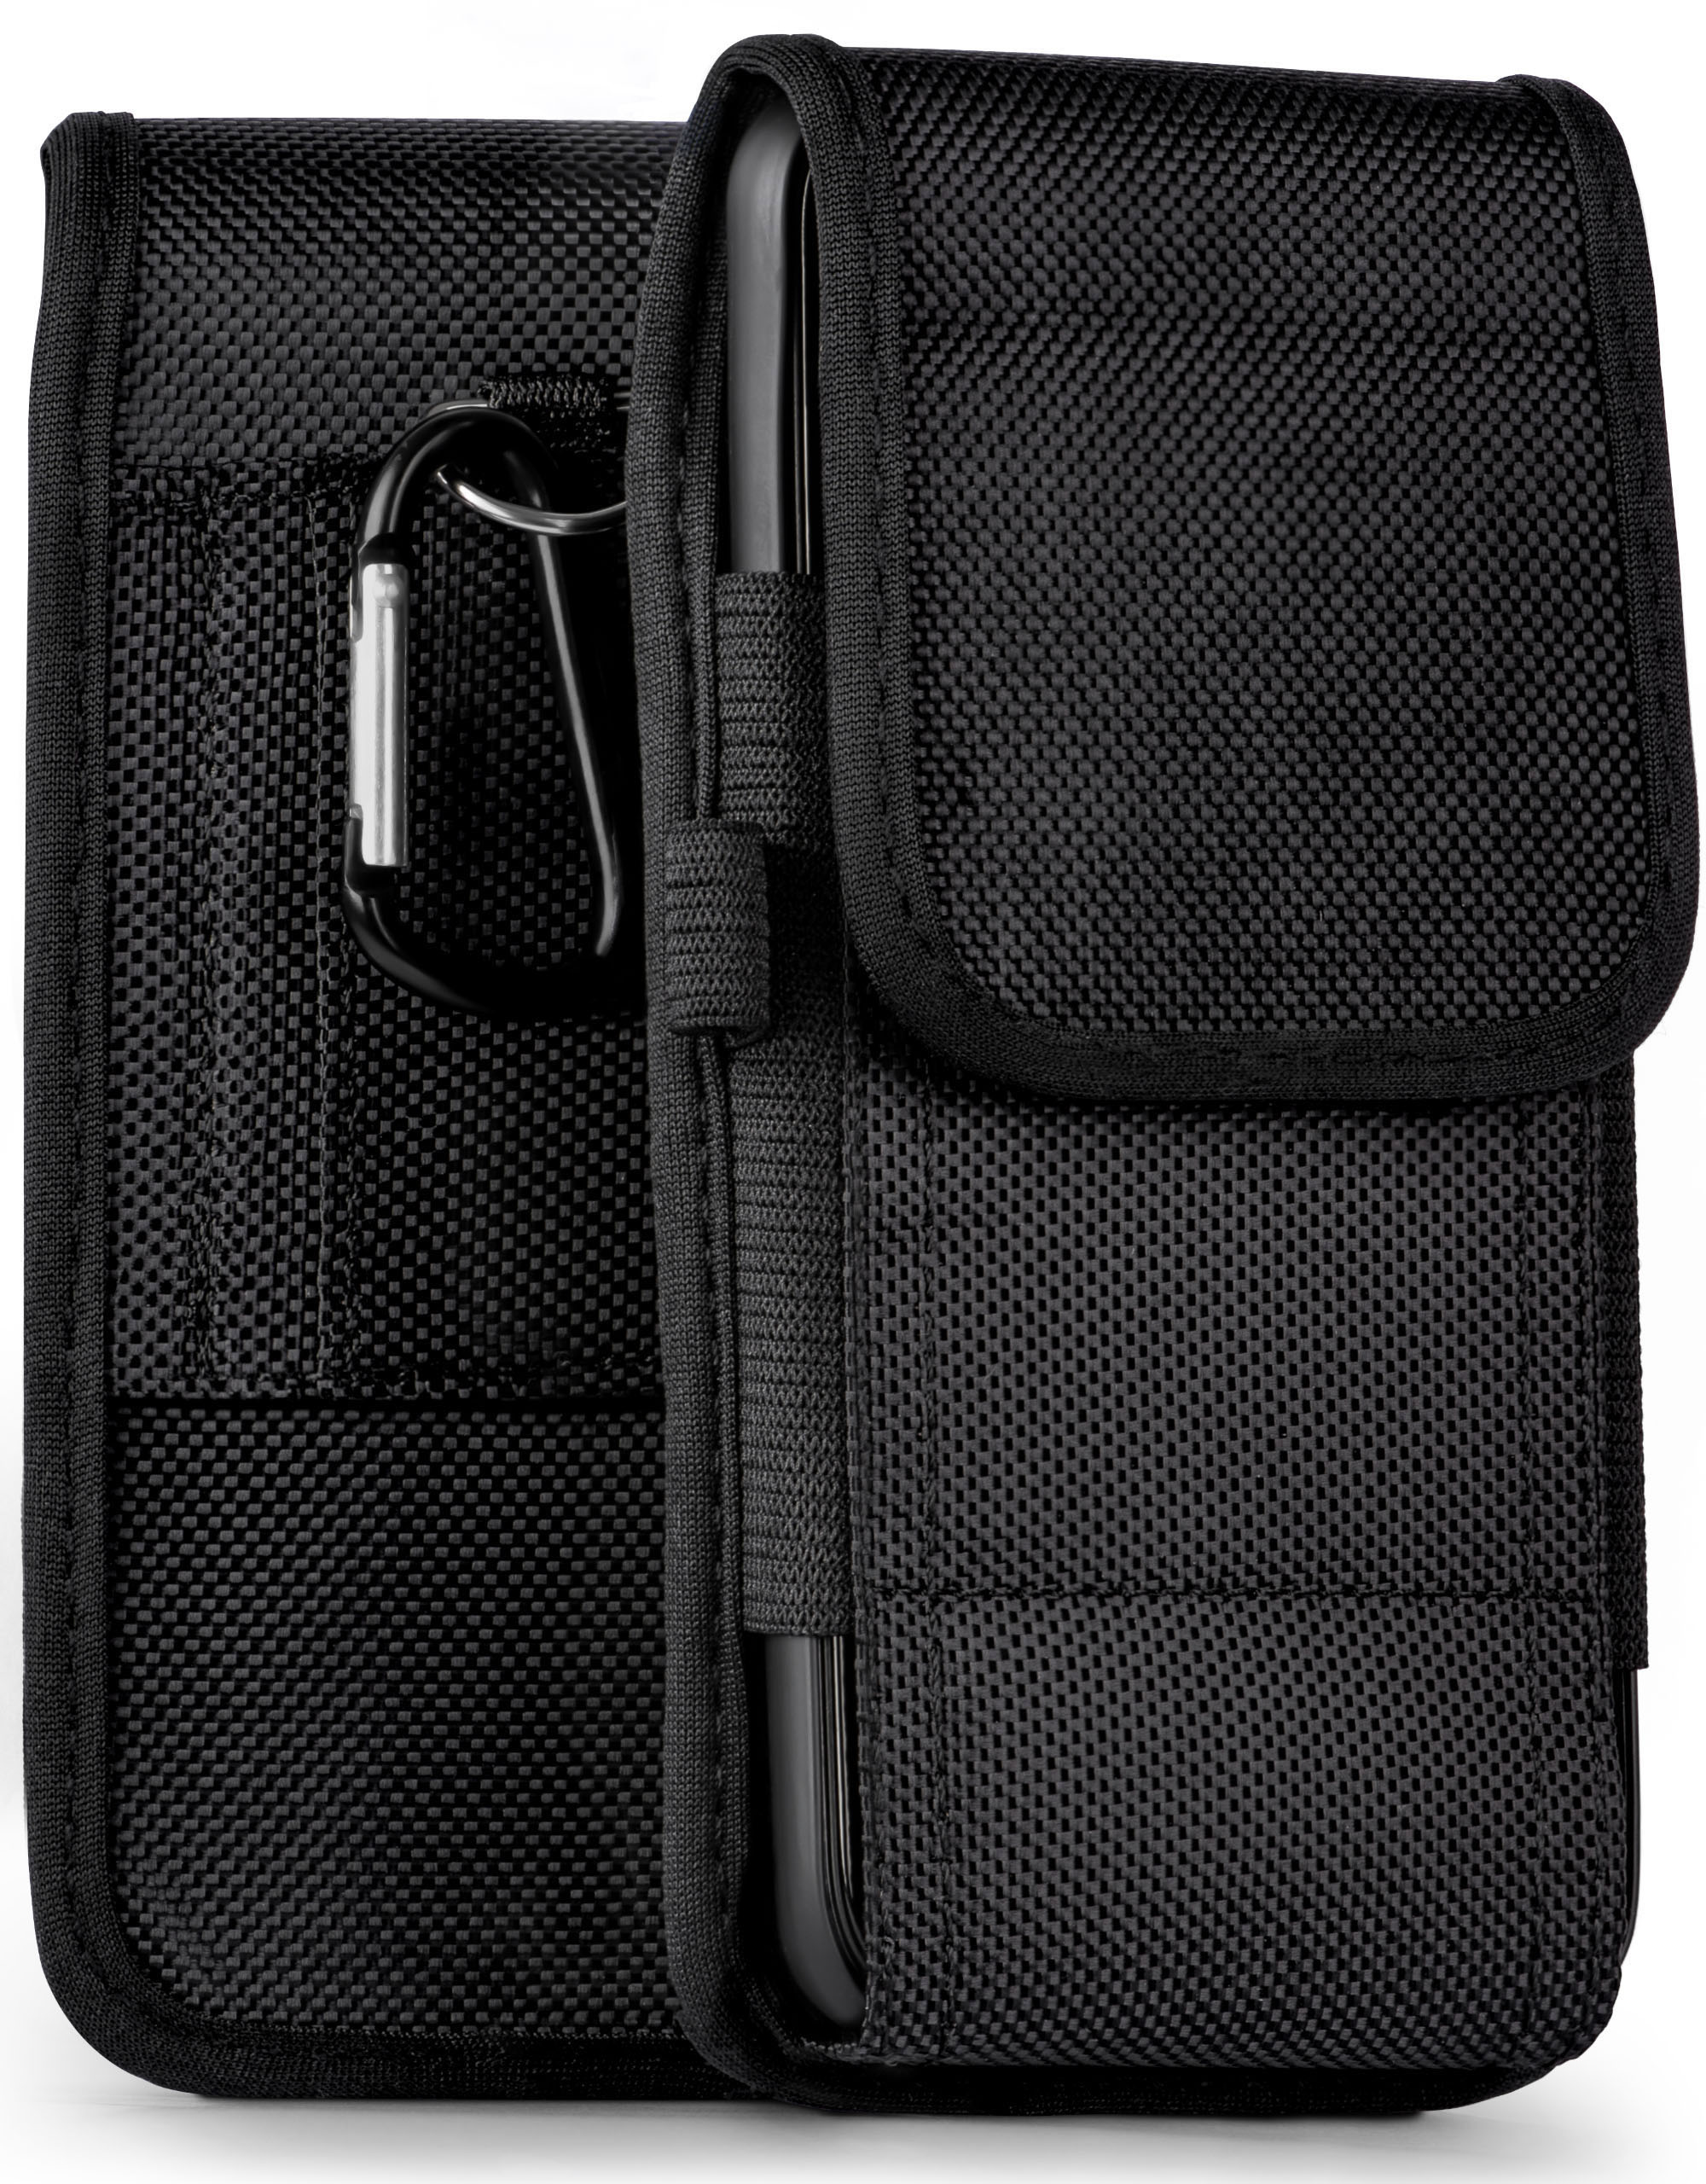 MOEX Agility Case, Holster, Cubot, Trail 20, Note